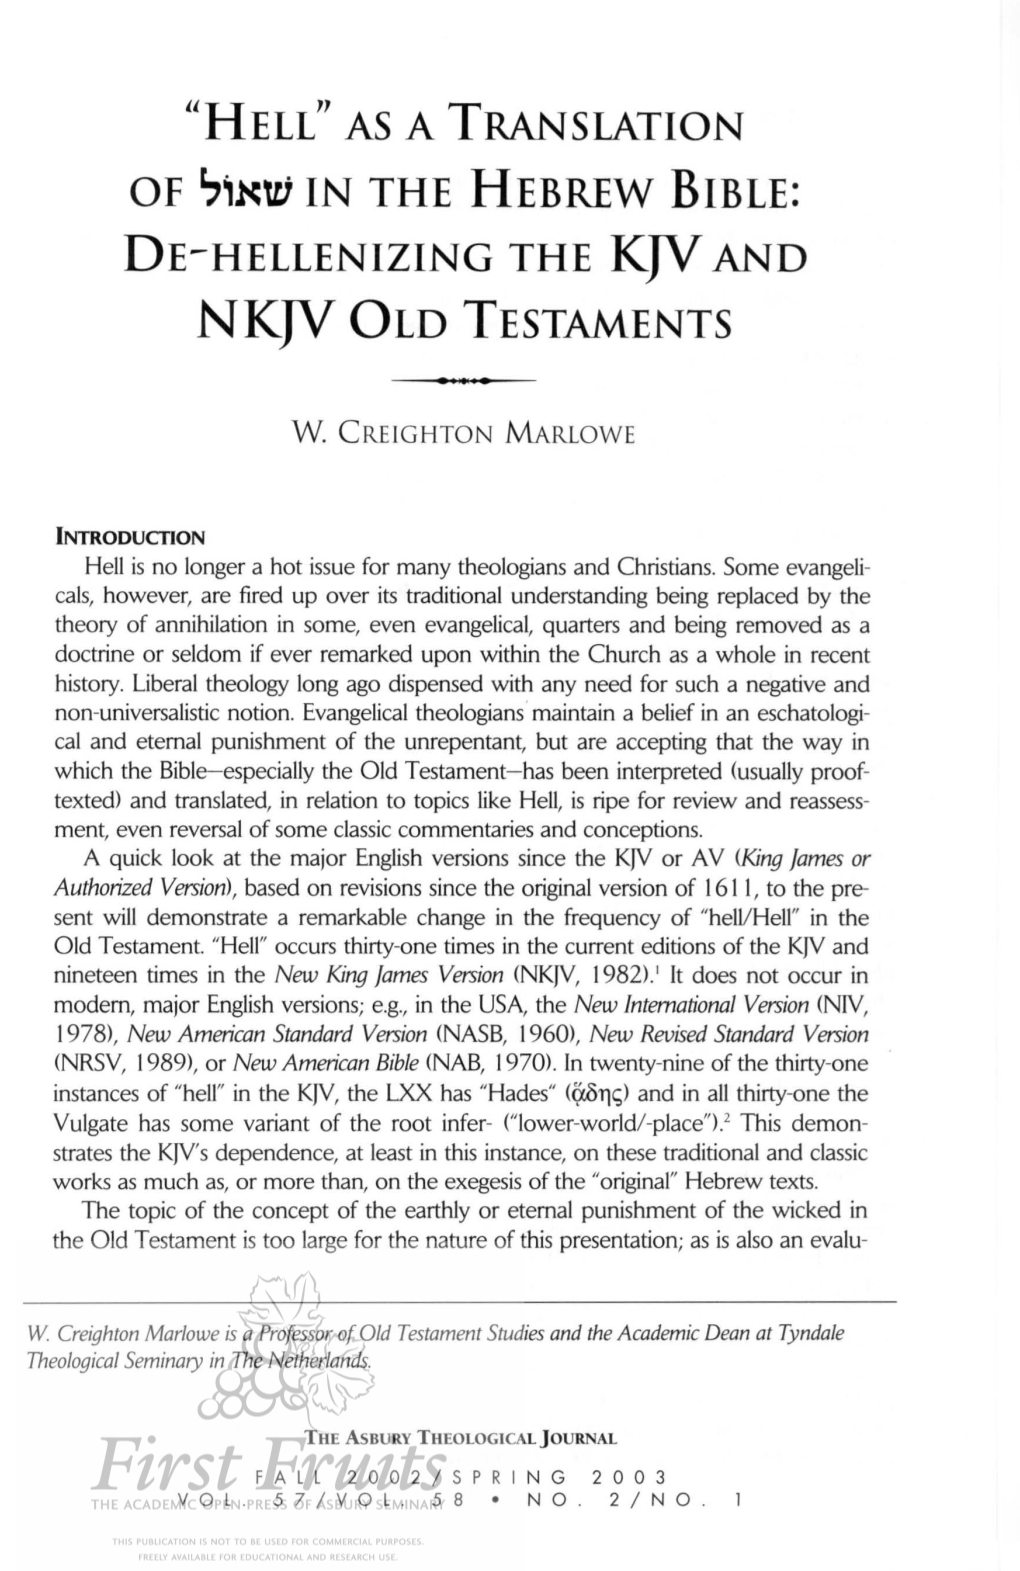 "Hell" As a Translation in the Hebrew Bible: De-Hellenizing the KJV And